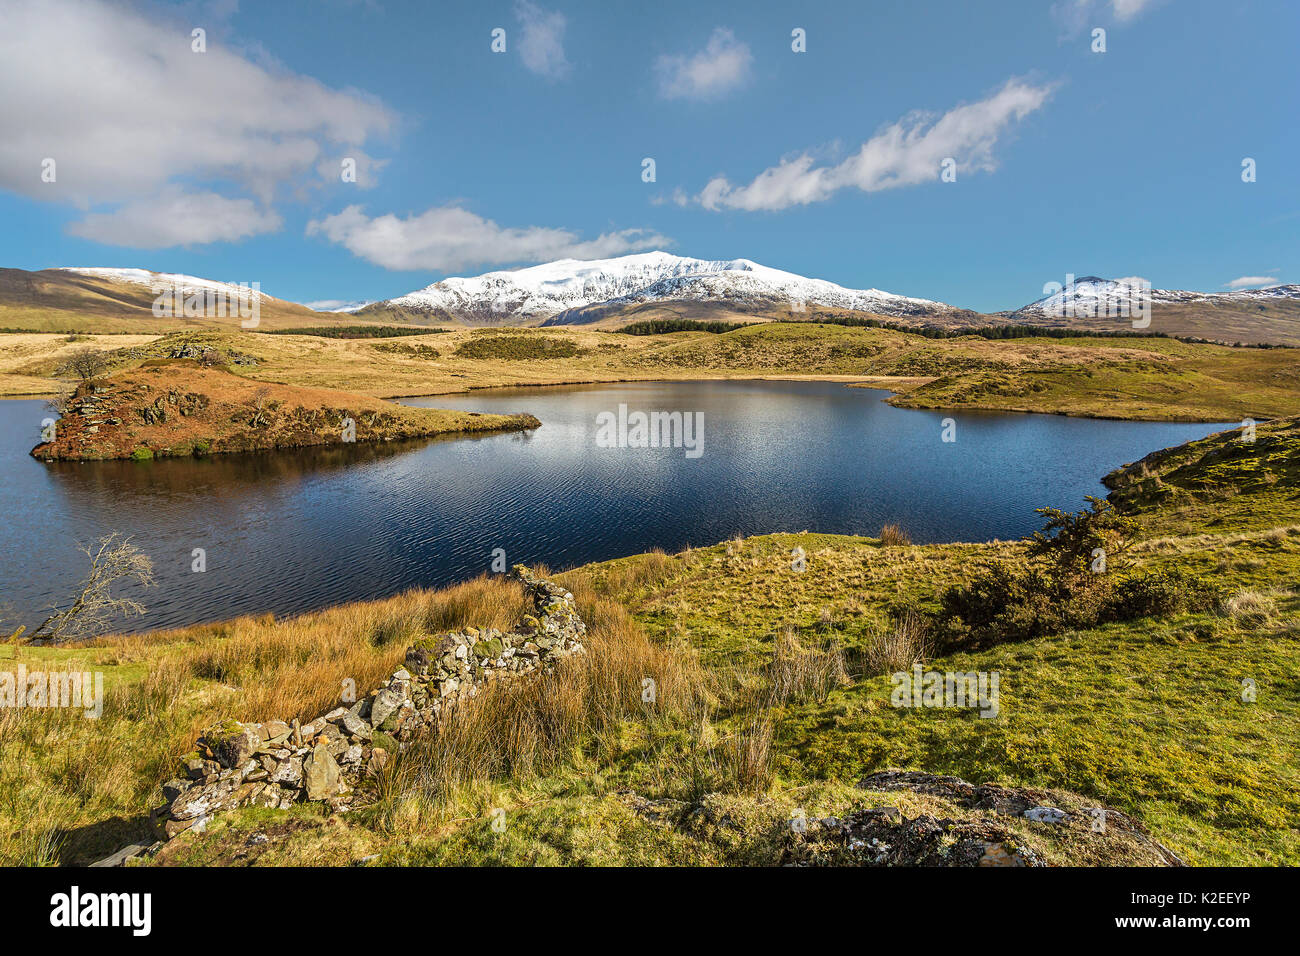 Mount Snowdon (Yr Wyddfa) viewed from the west over Llyn Dywarchen just off the B4418 road, Snowdonia, North Wales, UK, March. Stock Photo